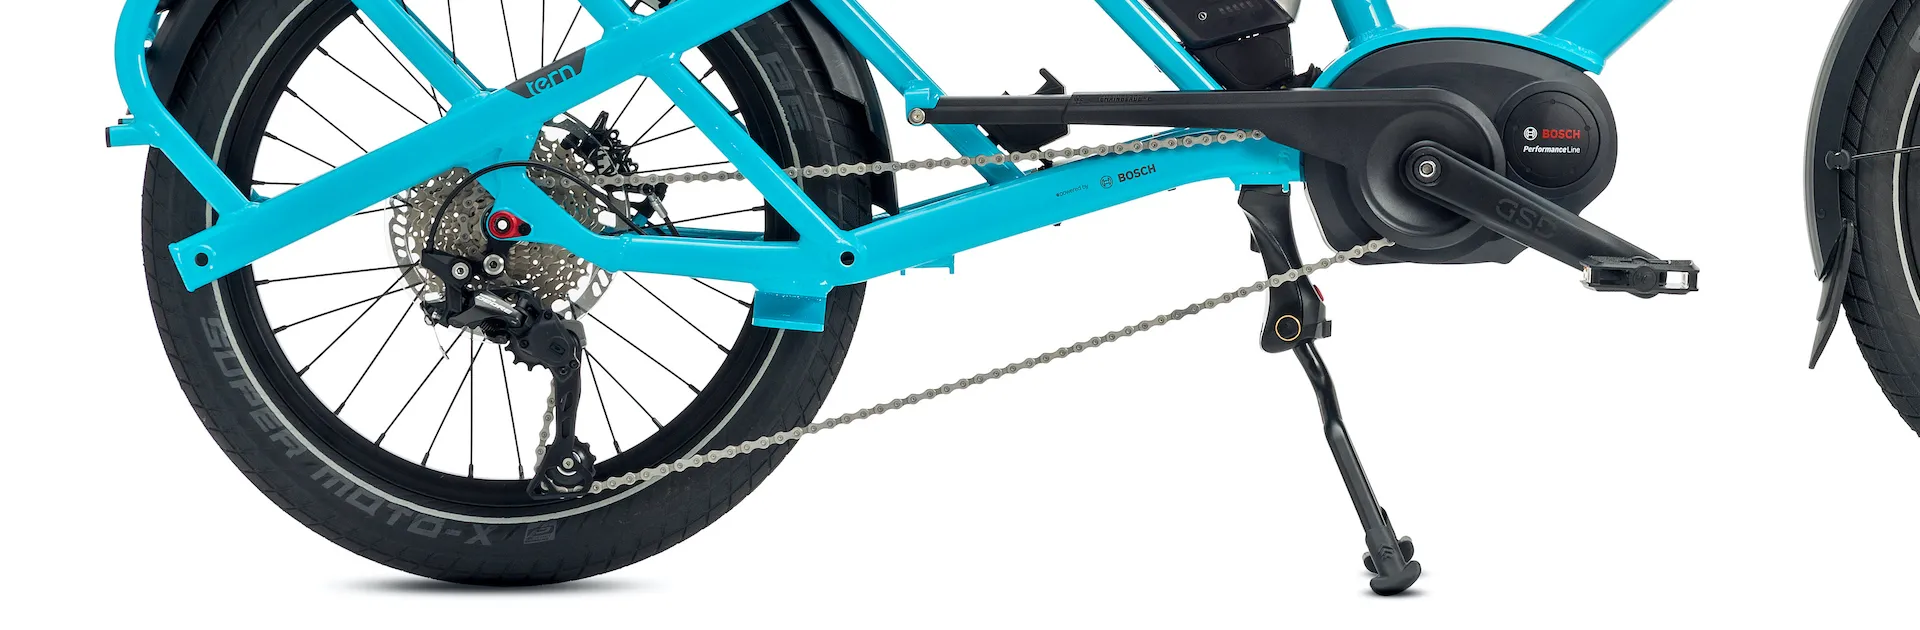 How to Check for Chain Wear